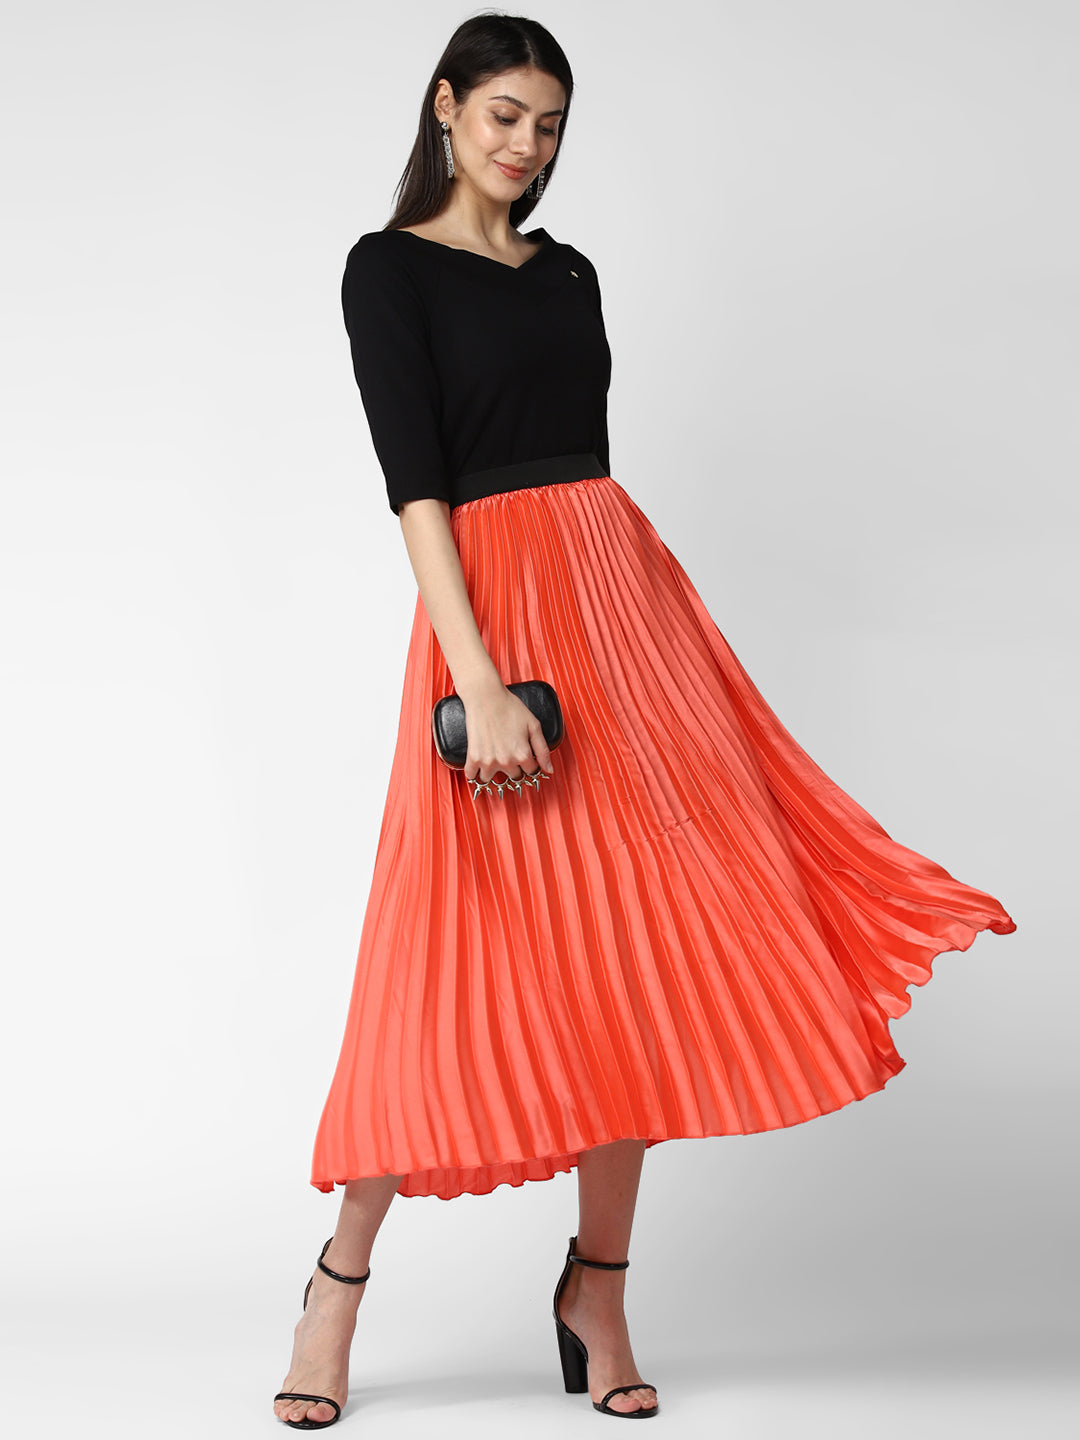 Women's Coral Satin Pleated Skirt